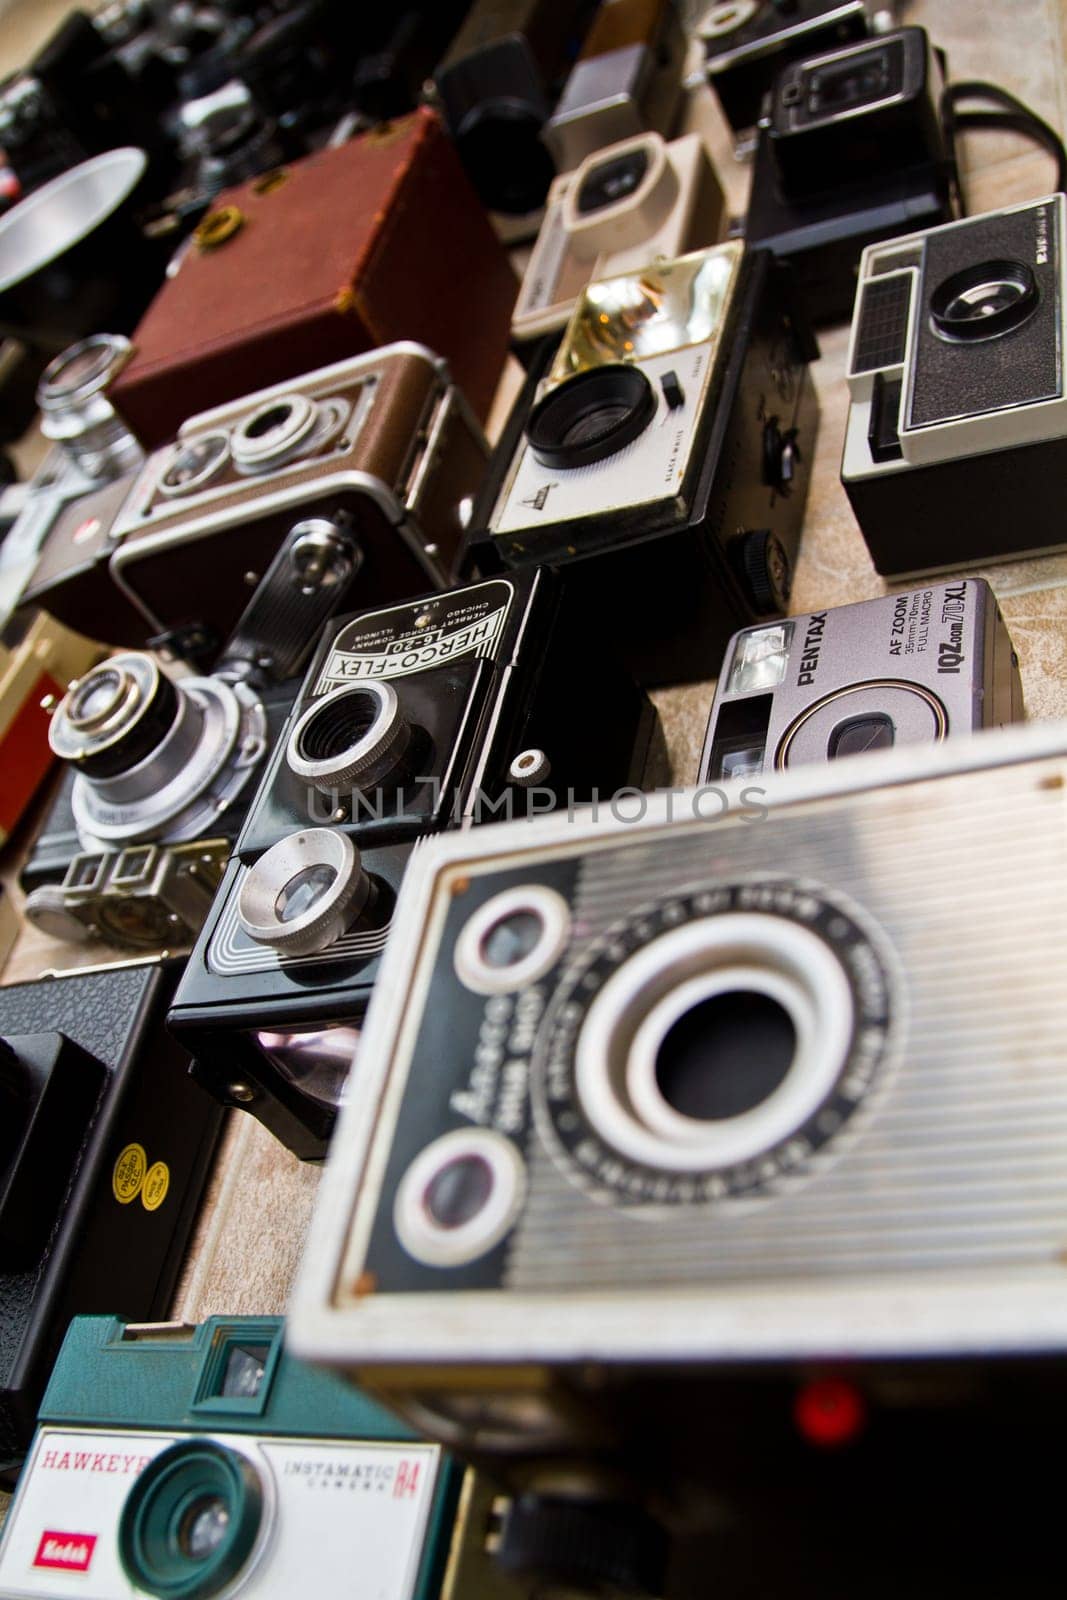 Vintage Camera Collection: A stunning assortment of nostalgic film cameras, including box, folding, and point-and-shoot models, displayed in a haphazard arrangement. From Fort Wayne, Indiana.